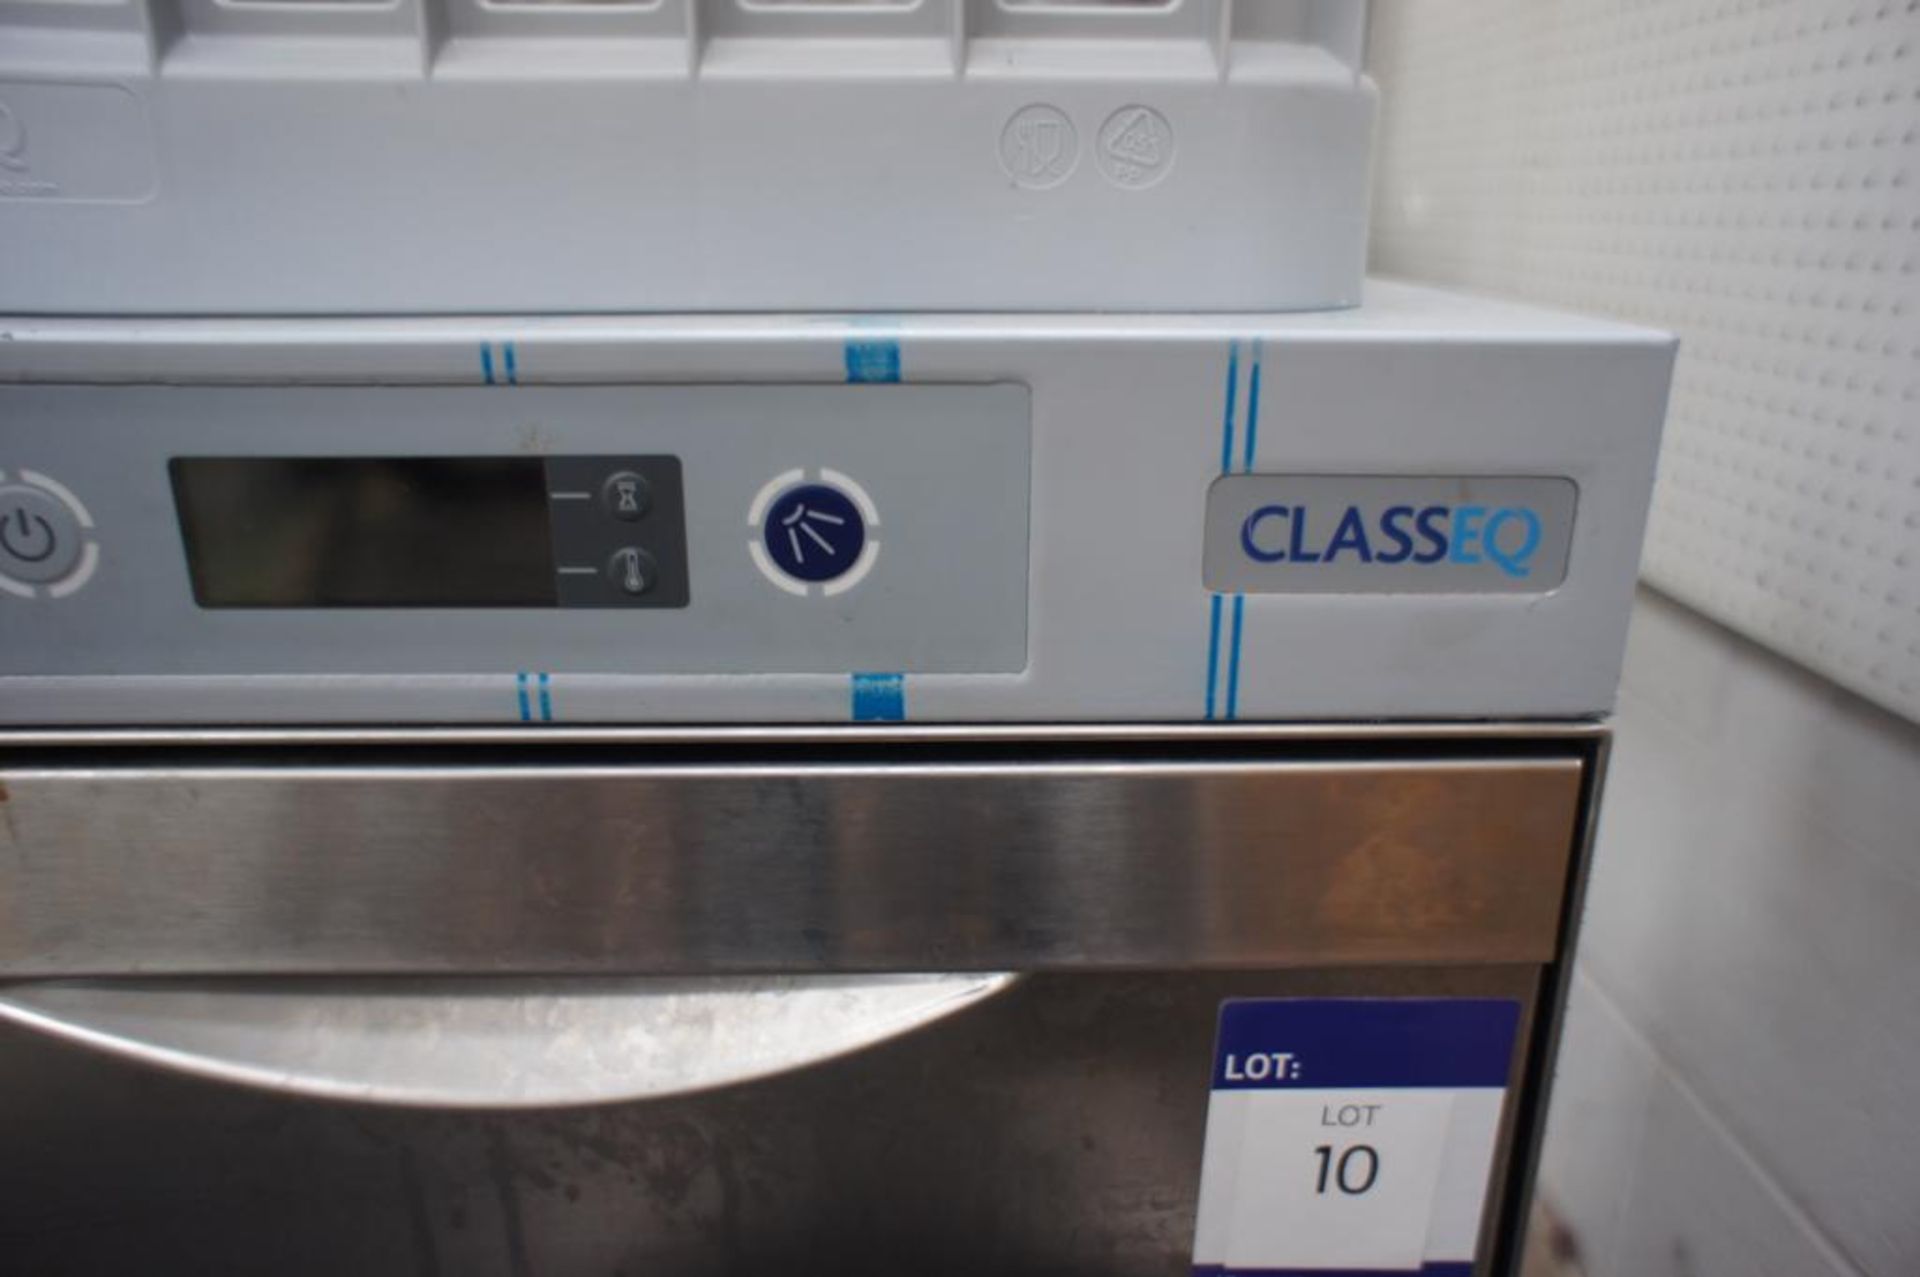 Class EQ Stainless Steel Glass Washer, 240v - Image 3 of 5